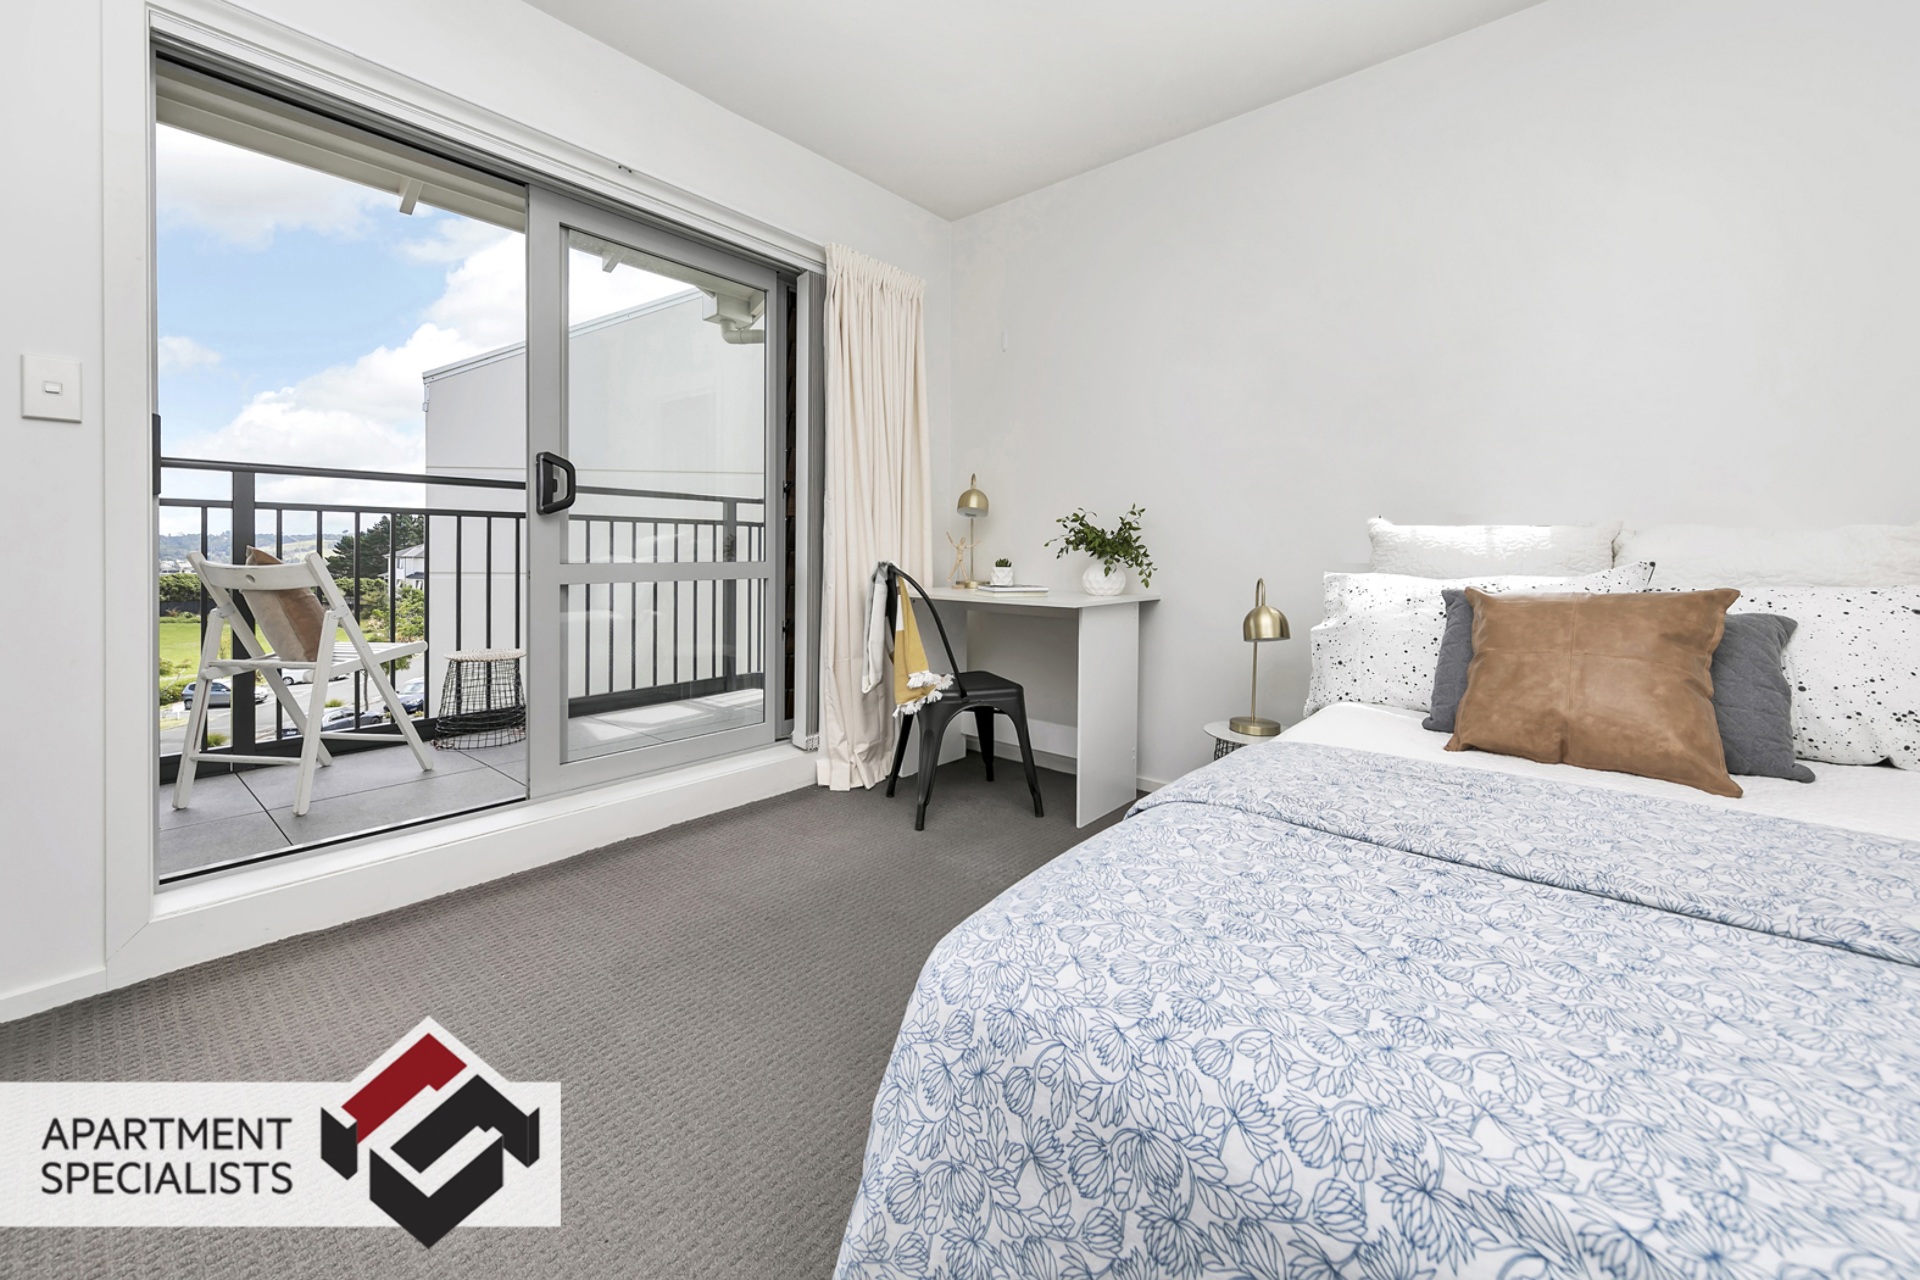 8 | 71 Spencer Road, Albany | Apartment Specialists